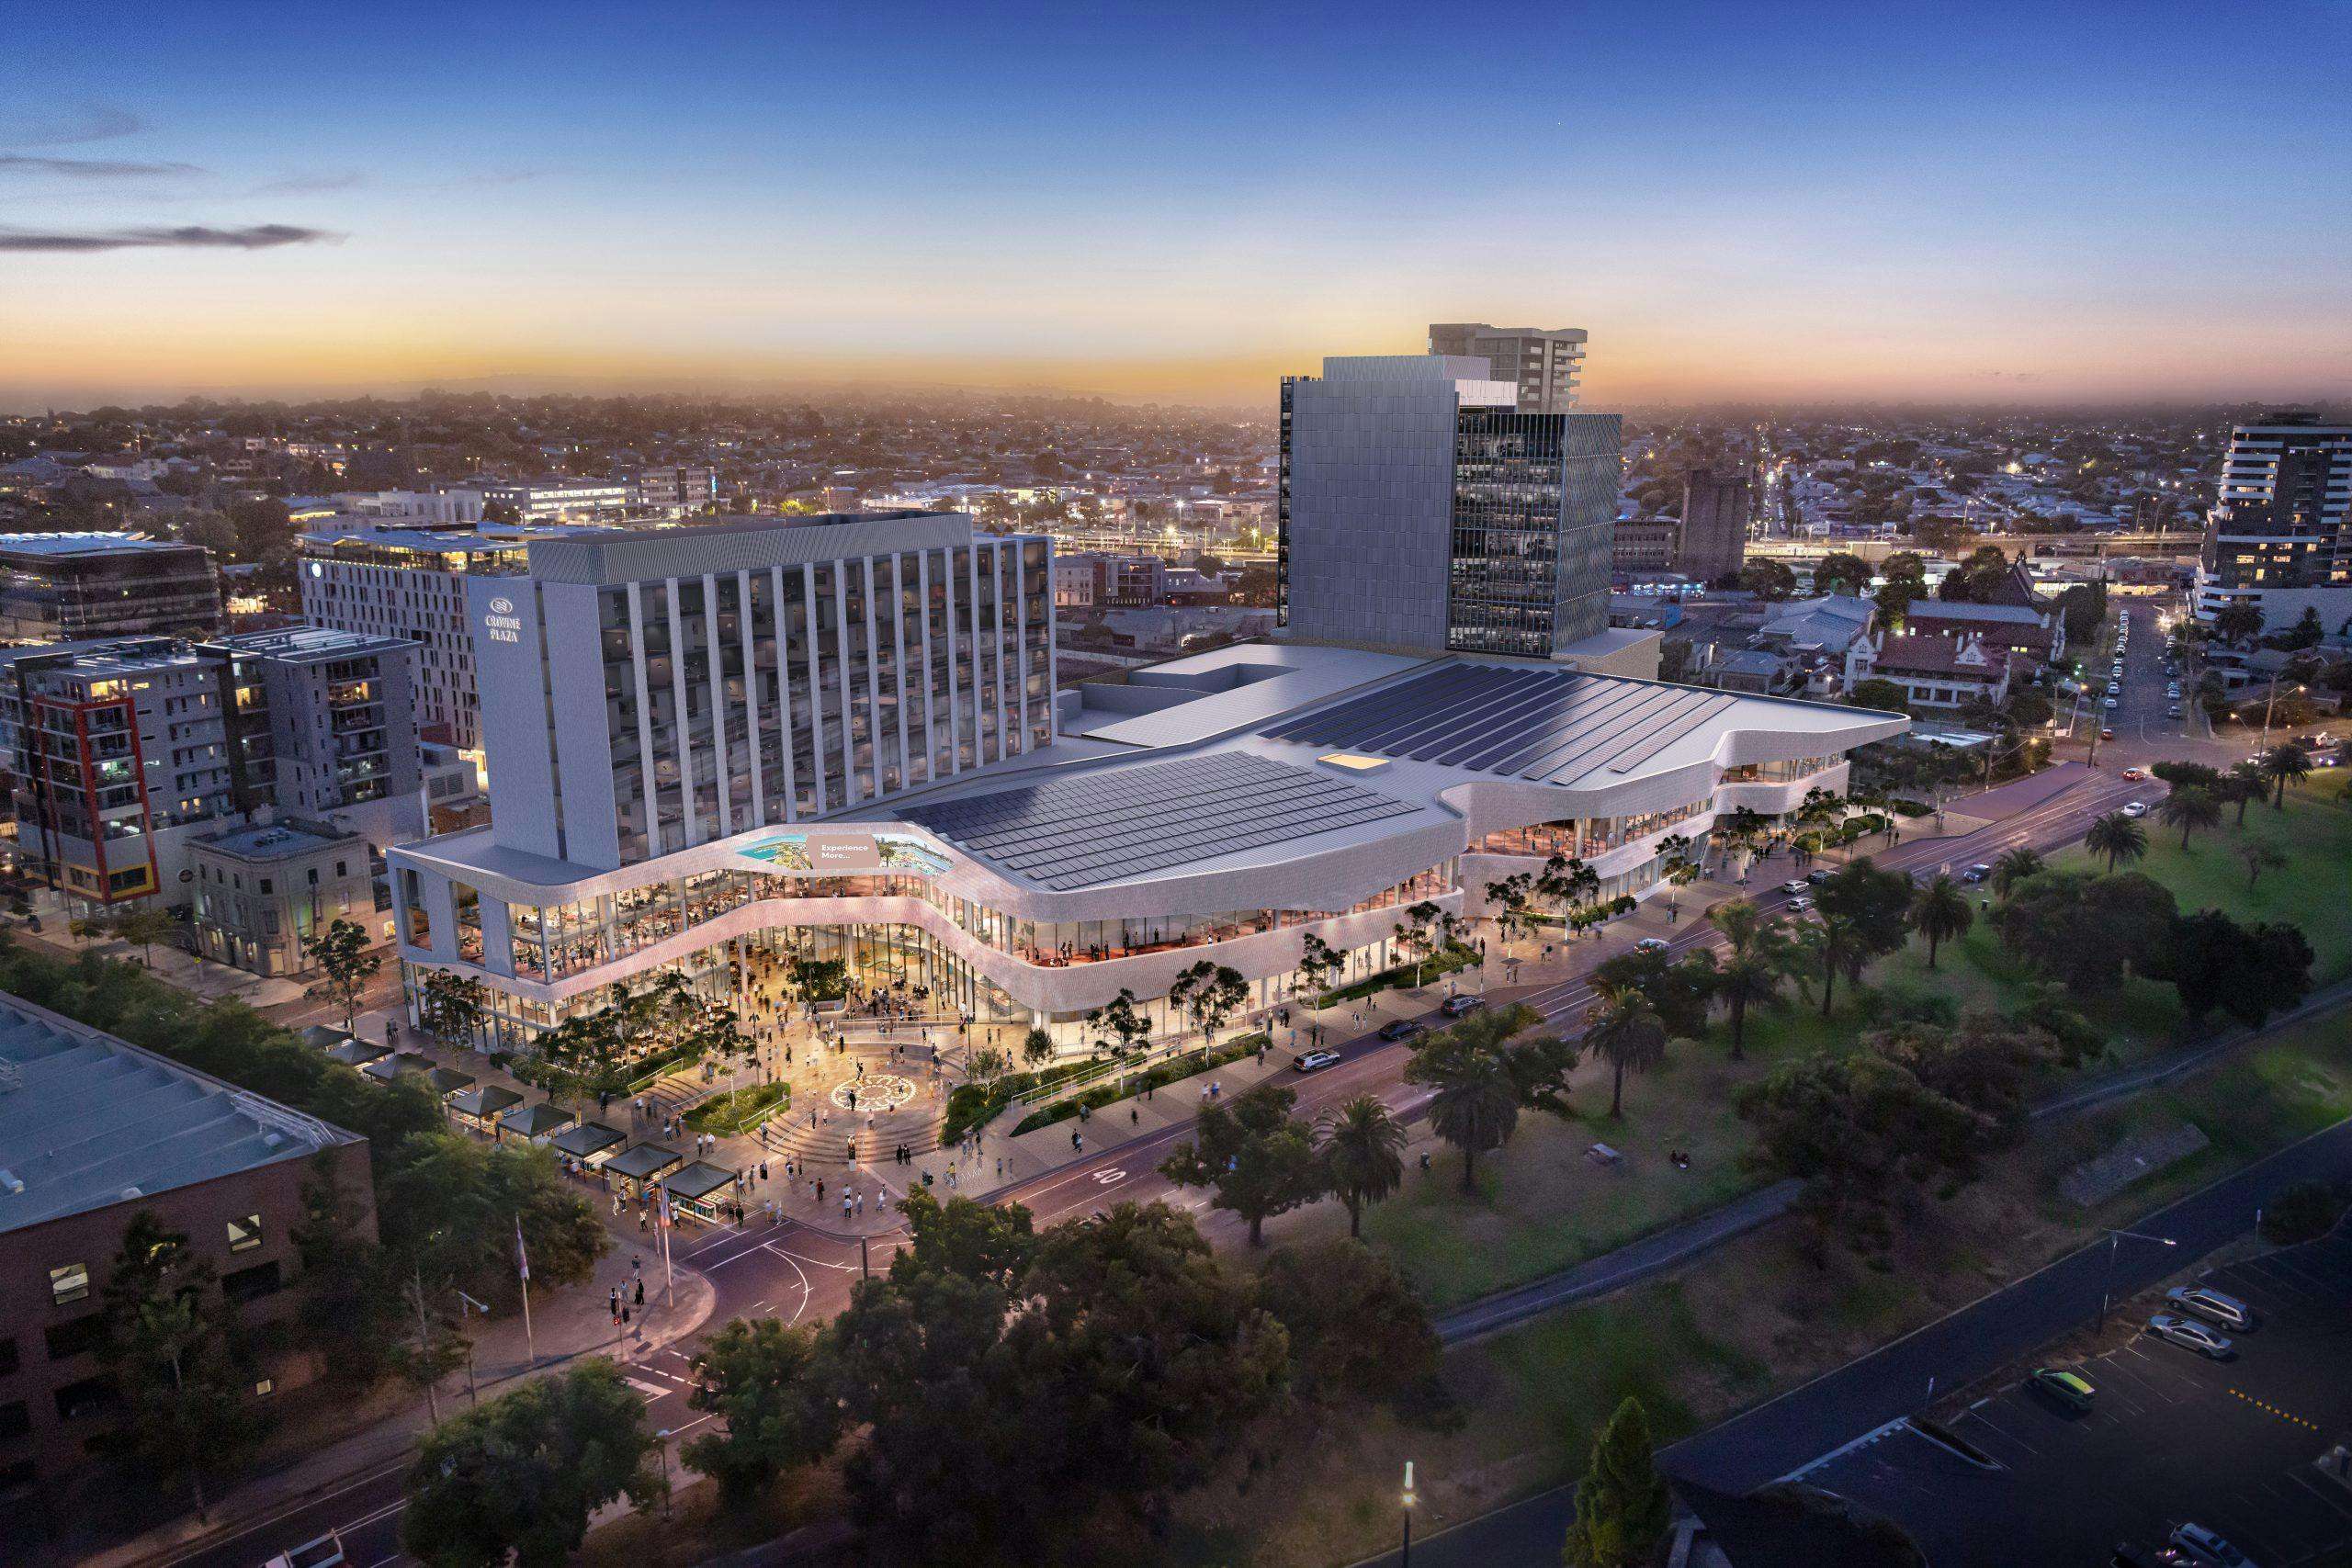 Plenary Conventions preferred for Geelong’s new convention centre precinct image